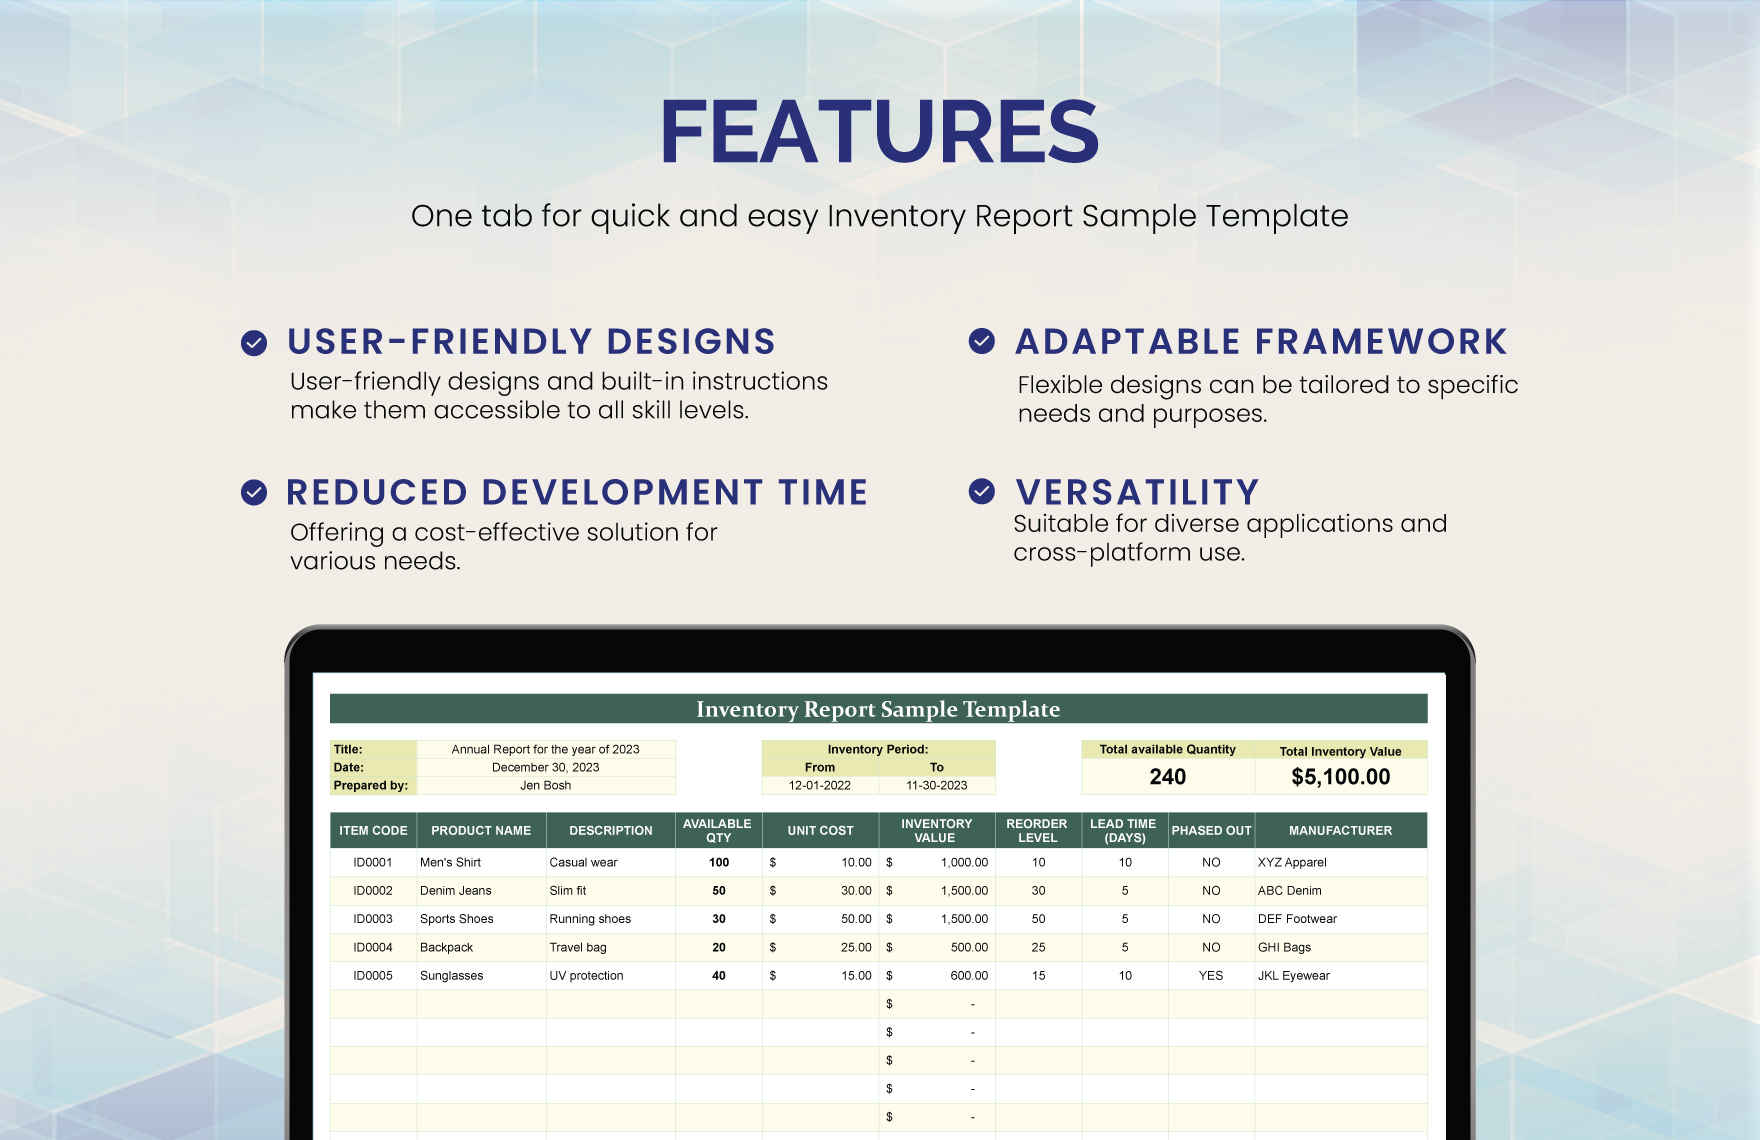 Inventory Report Sample Template